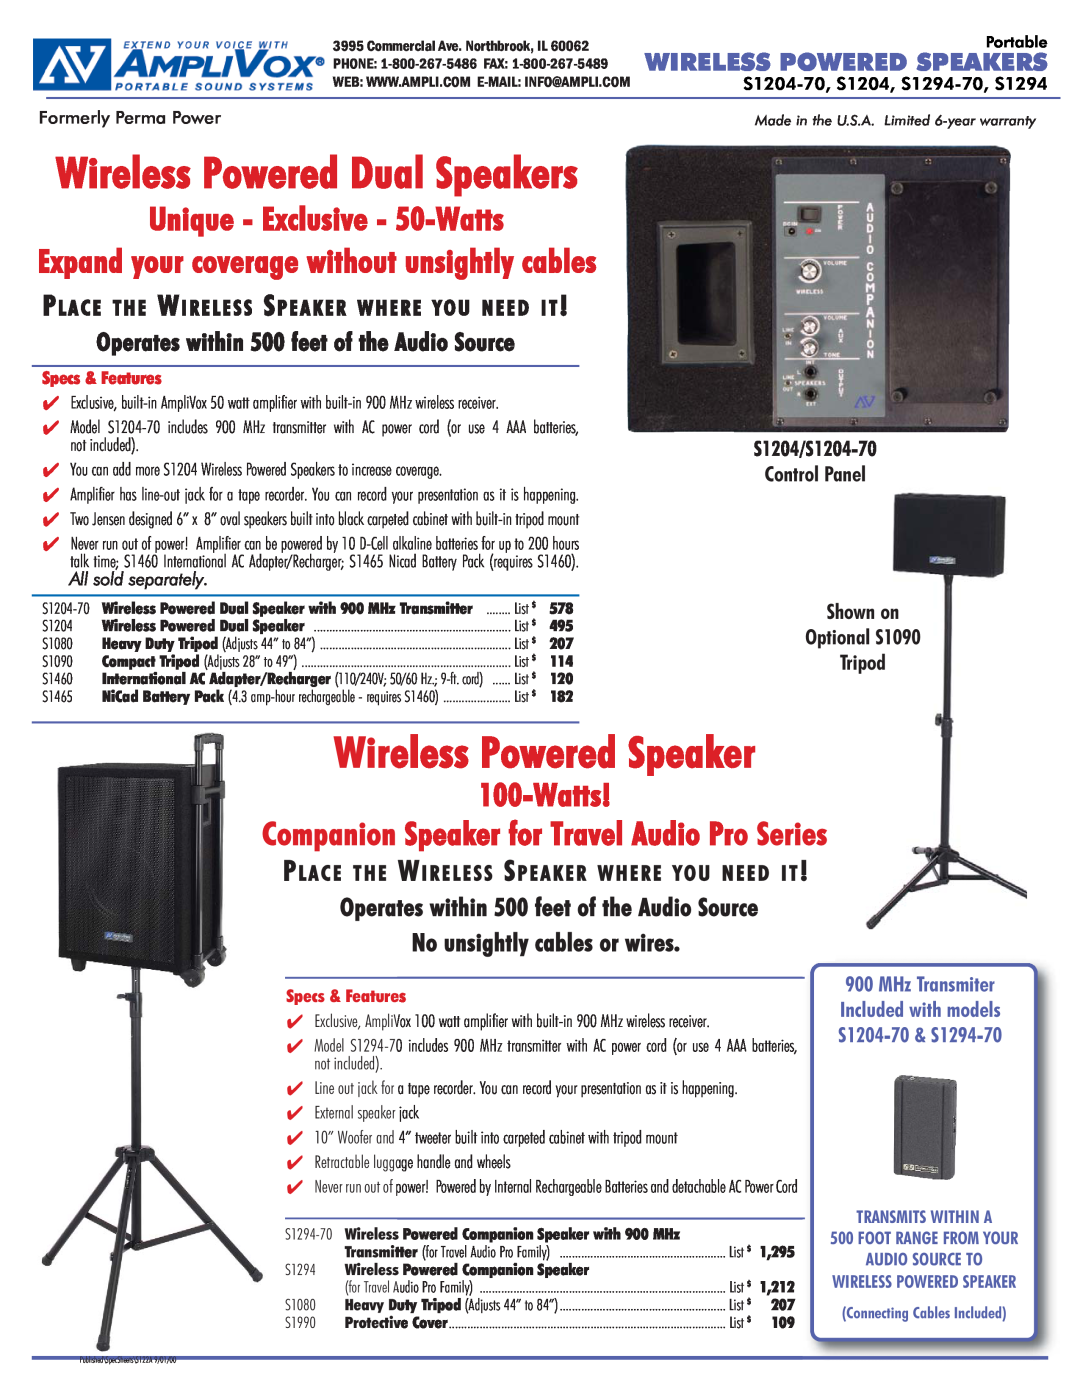 AmpliVox manual Wireless Powered Speaker, MODEL S1204-70USE FOR SW227, Dual Module Speaker with 169.445 MHz Transmitter 